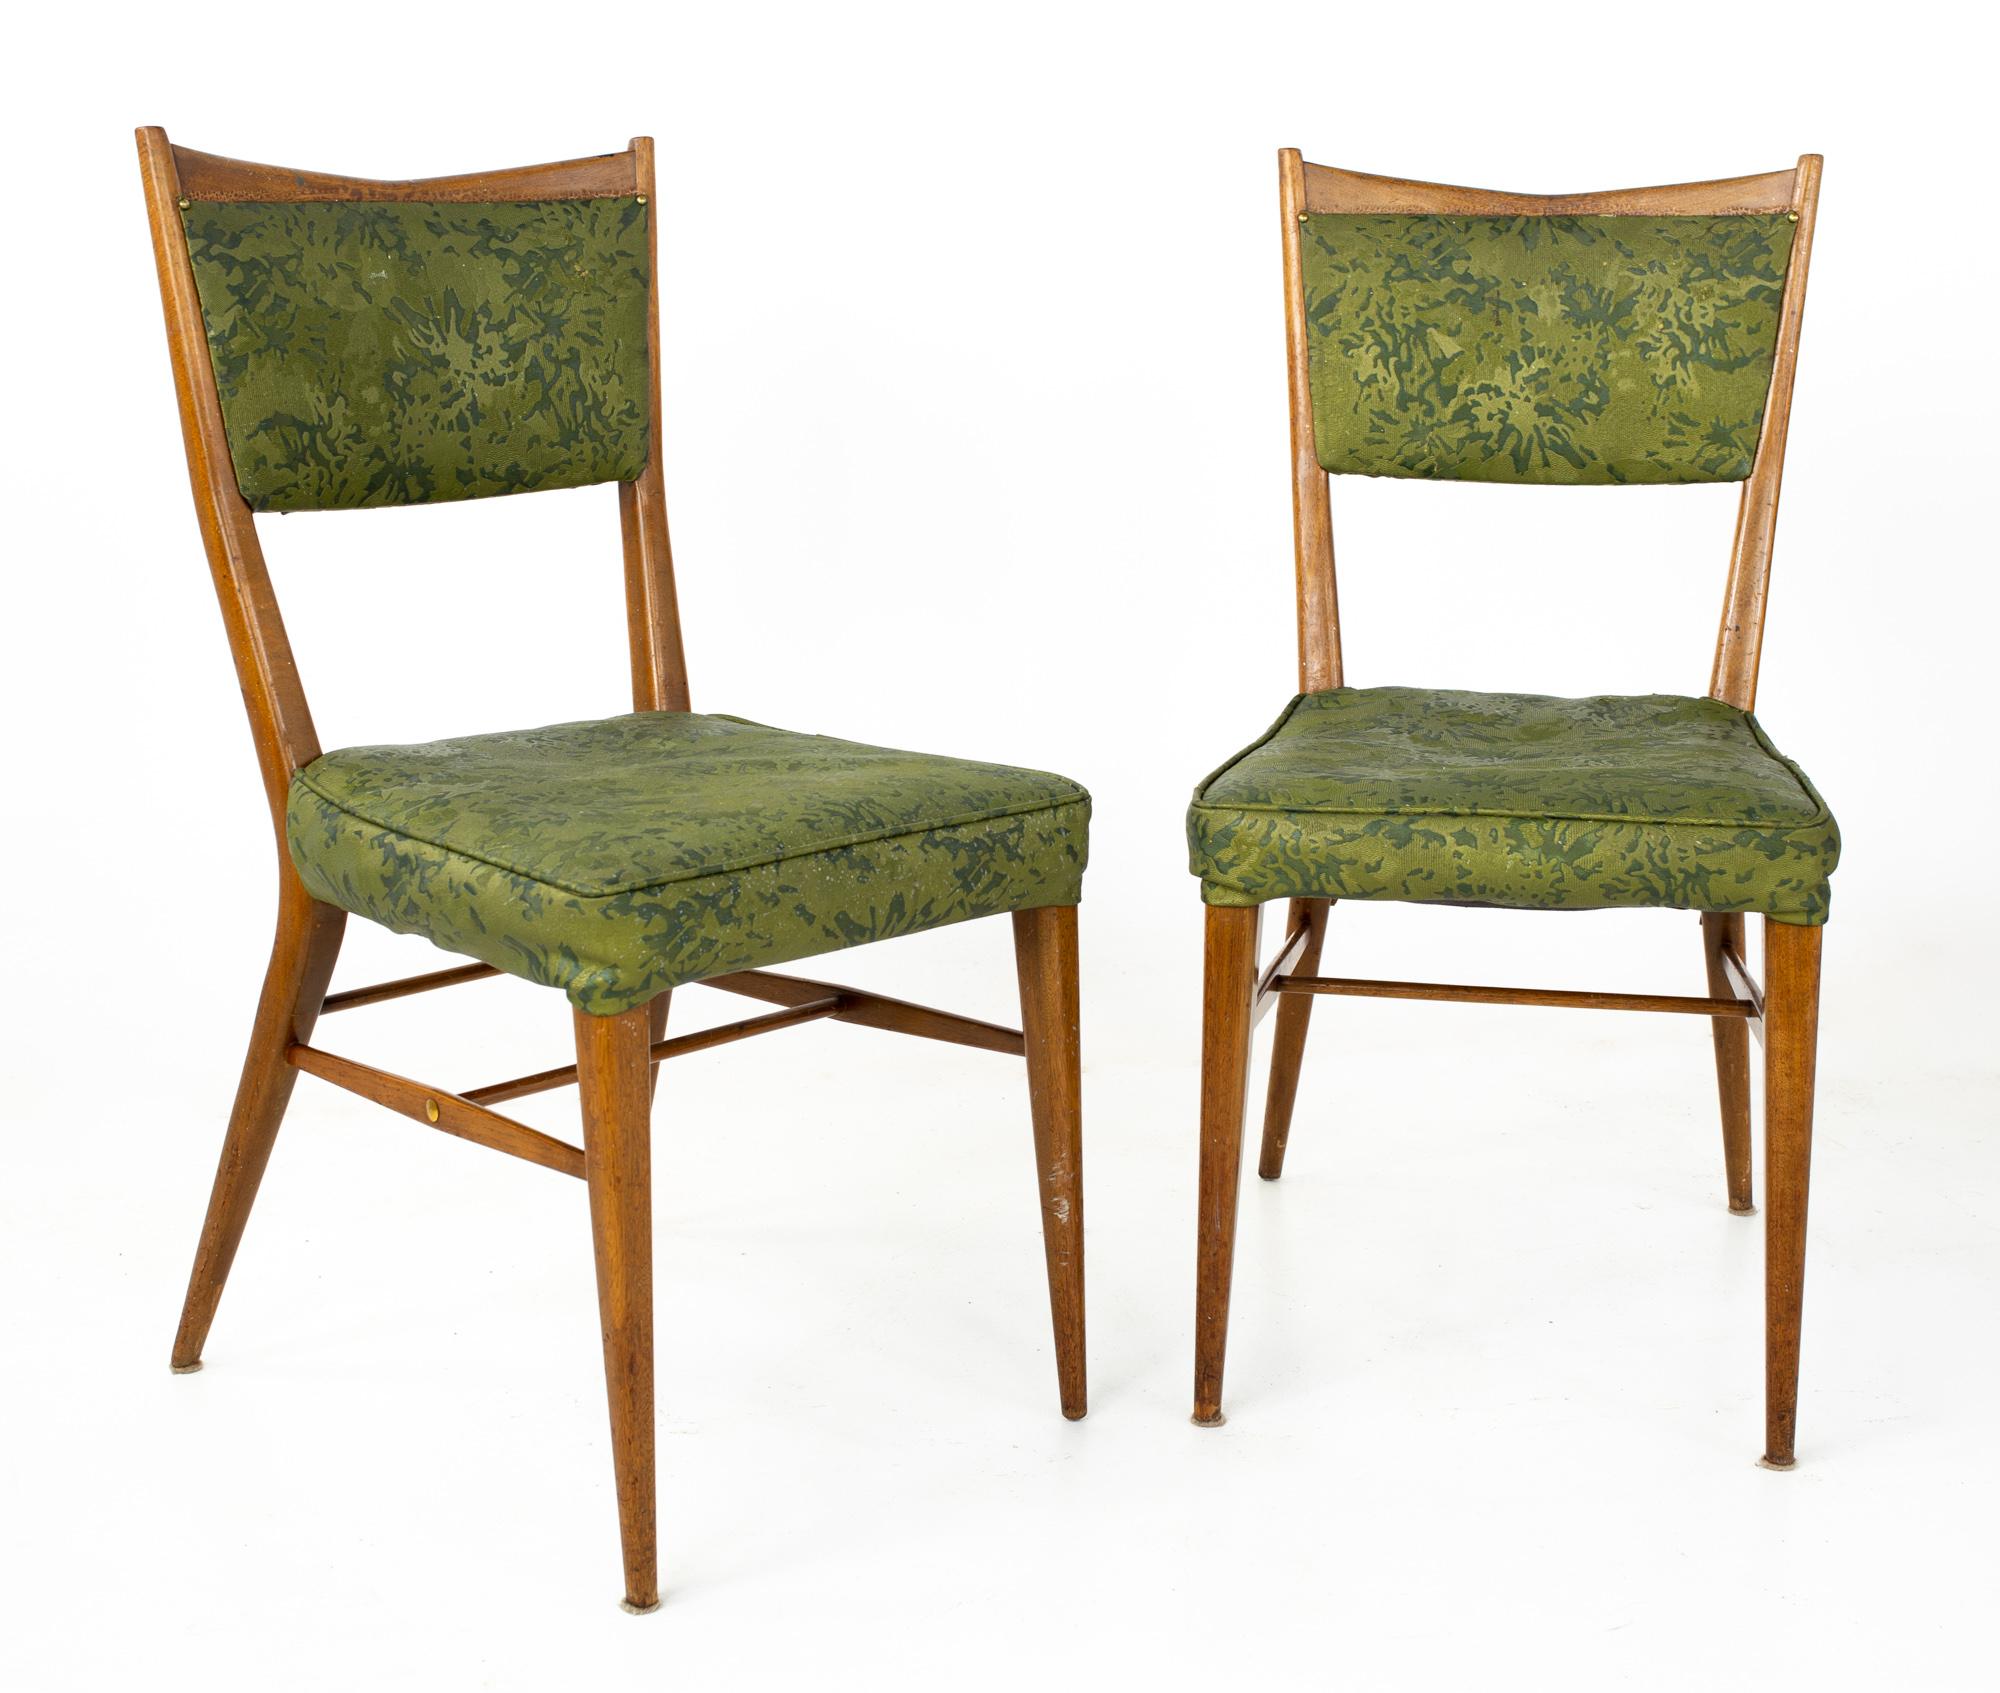 Paul McCobb for Calvin Mid Century chairs - pair
Each chair measures: 17.25 wide x 18.25 deep x 34.25 high, with a seat height of 18 inches

All pieces of furniture can be had in what we call restored vintage condition. That means the piece is